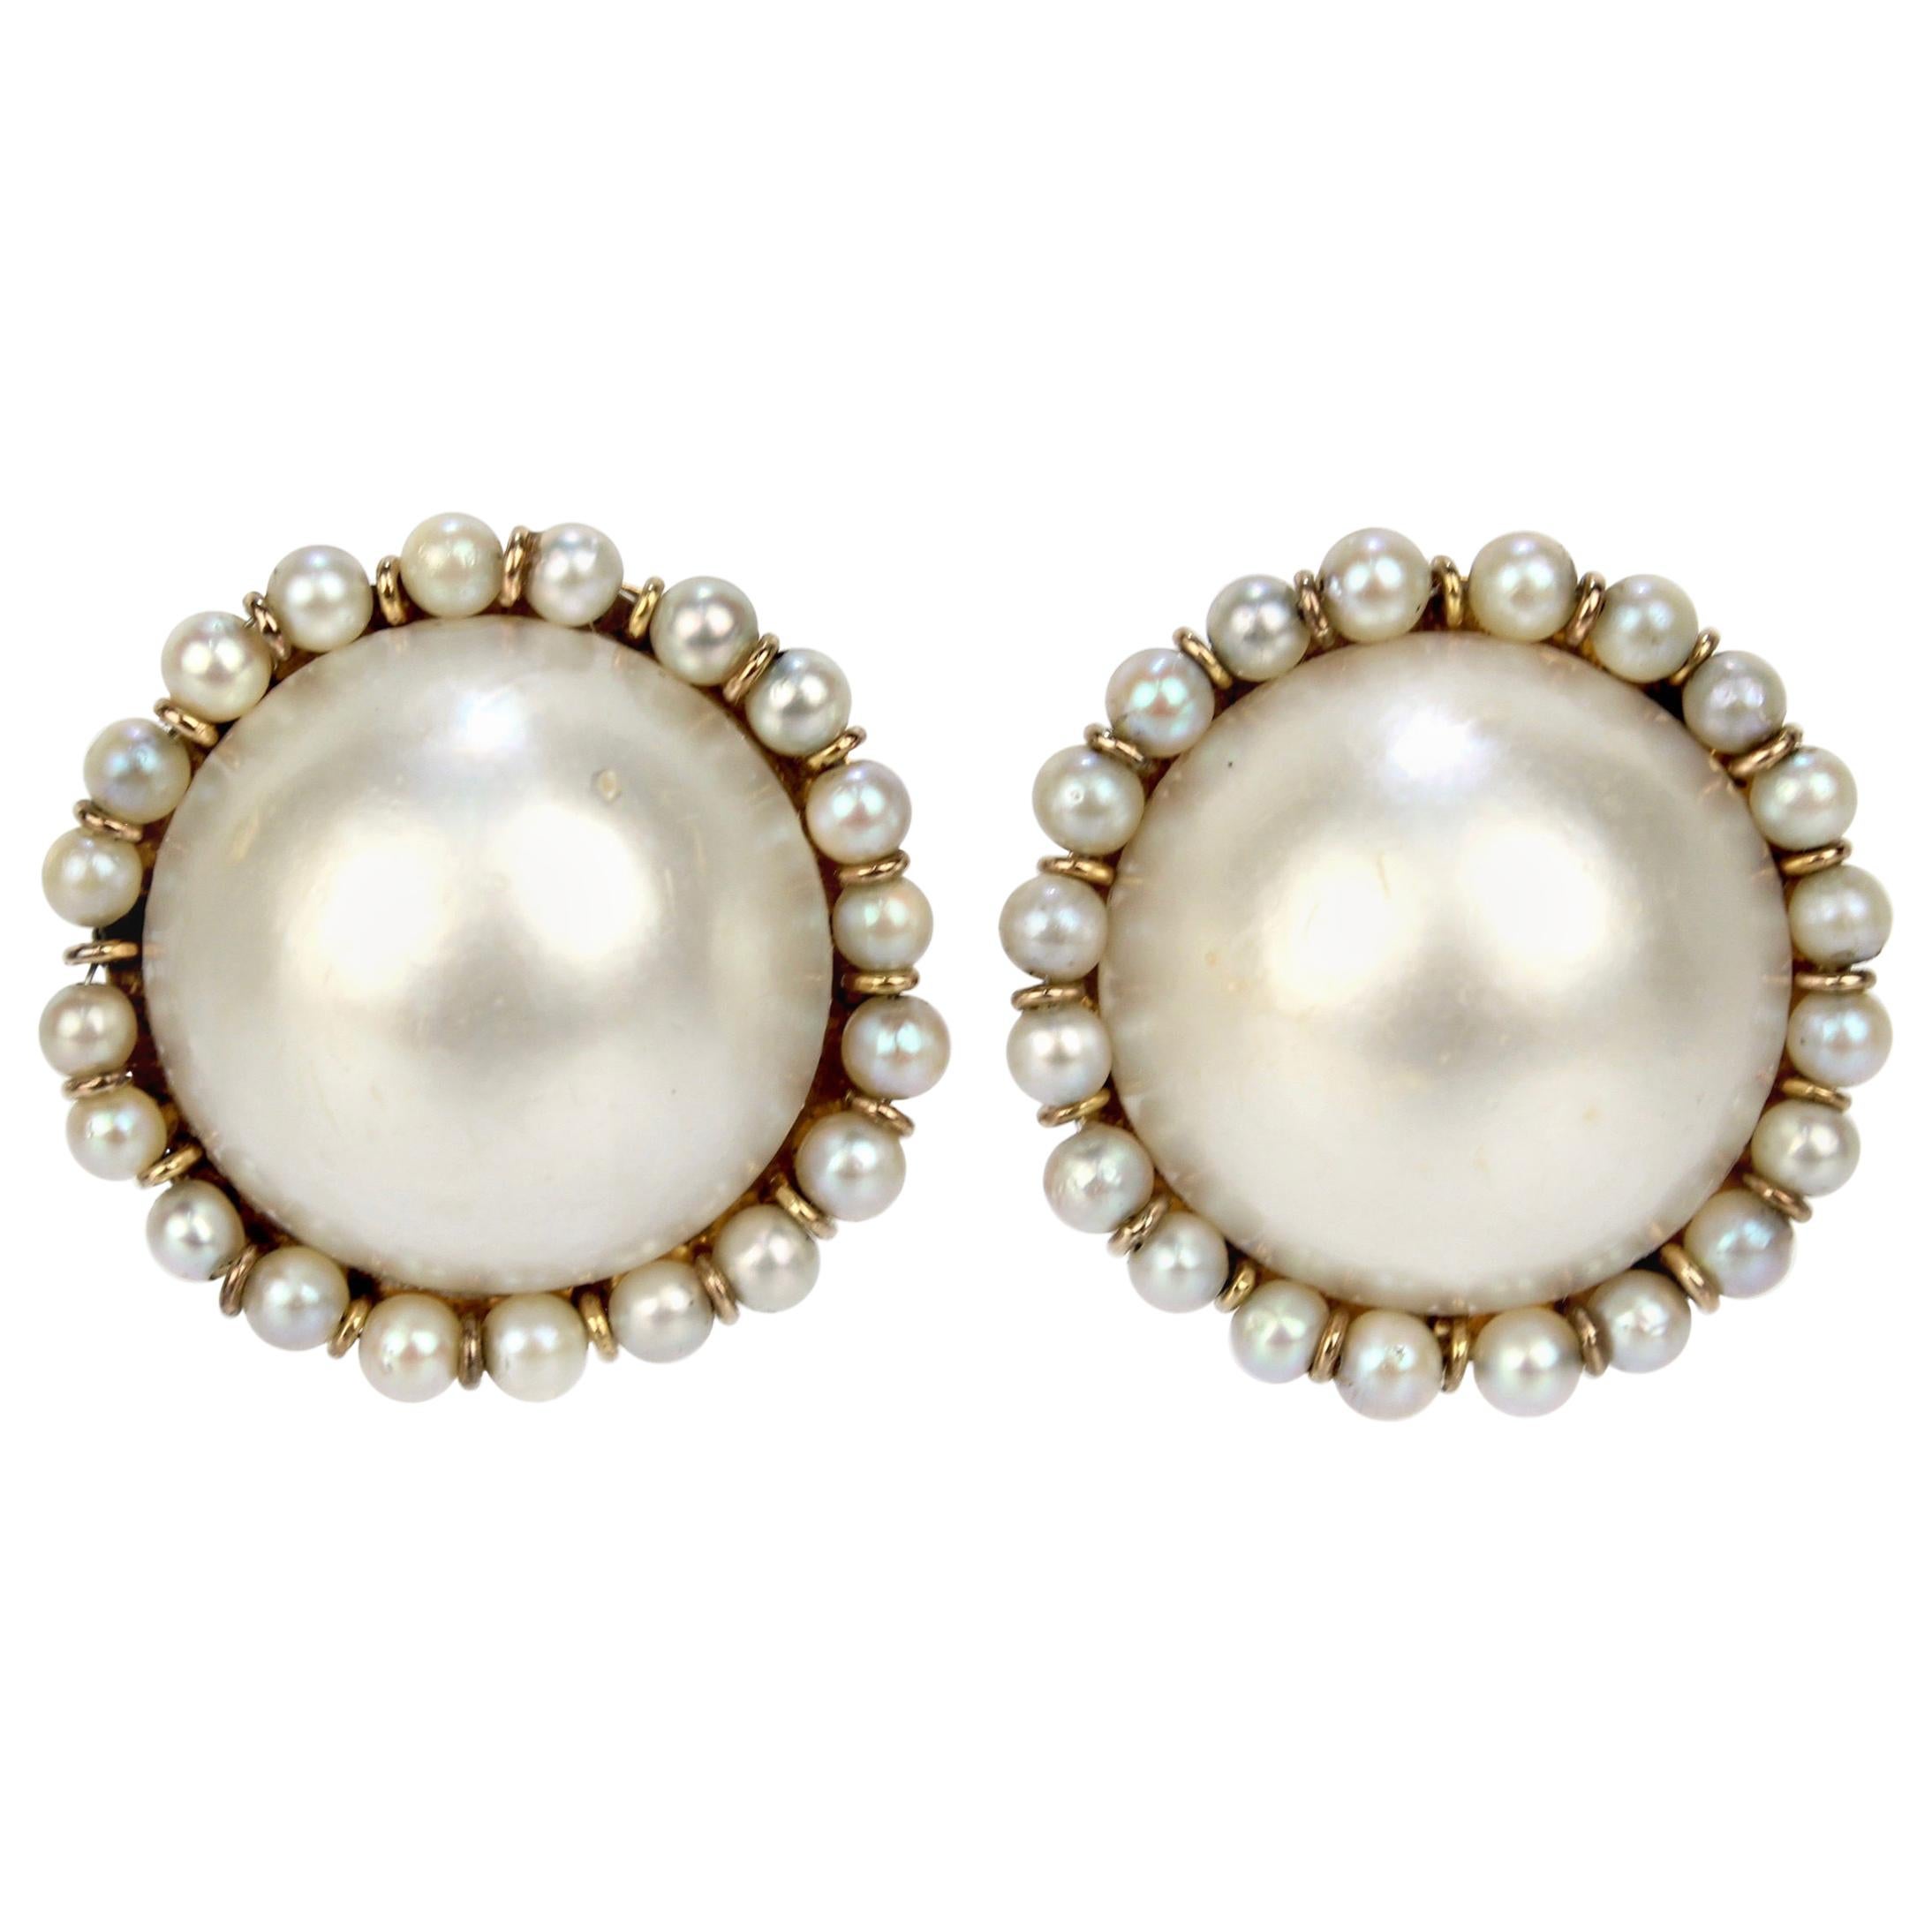 Large 14 Karat Gold, Mabe Pearl, and Round White Pearl Clip-On Earrings